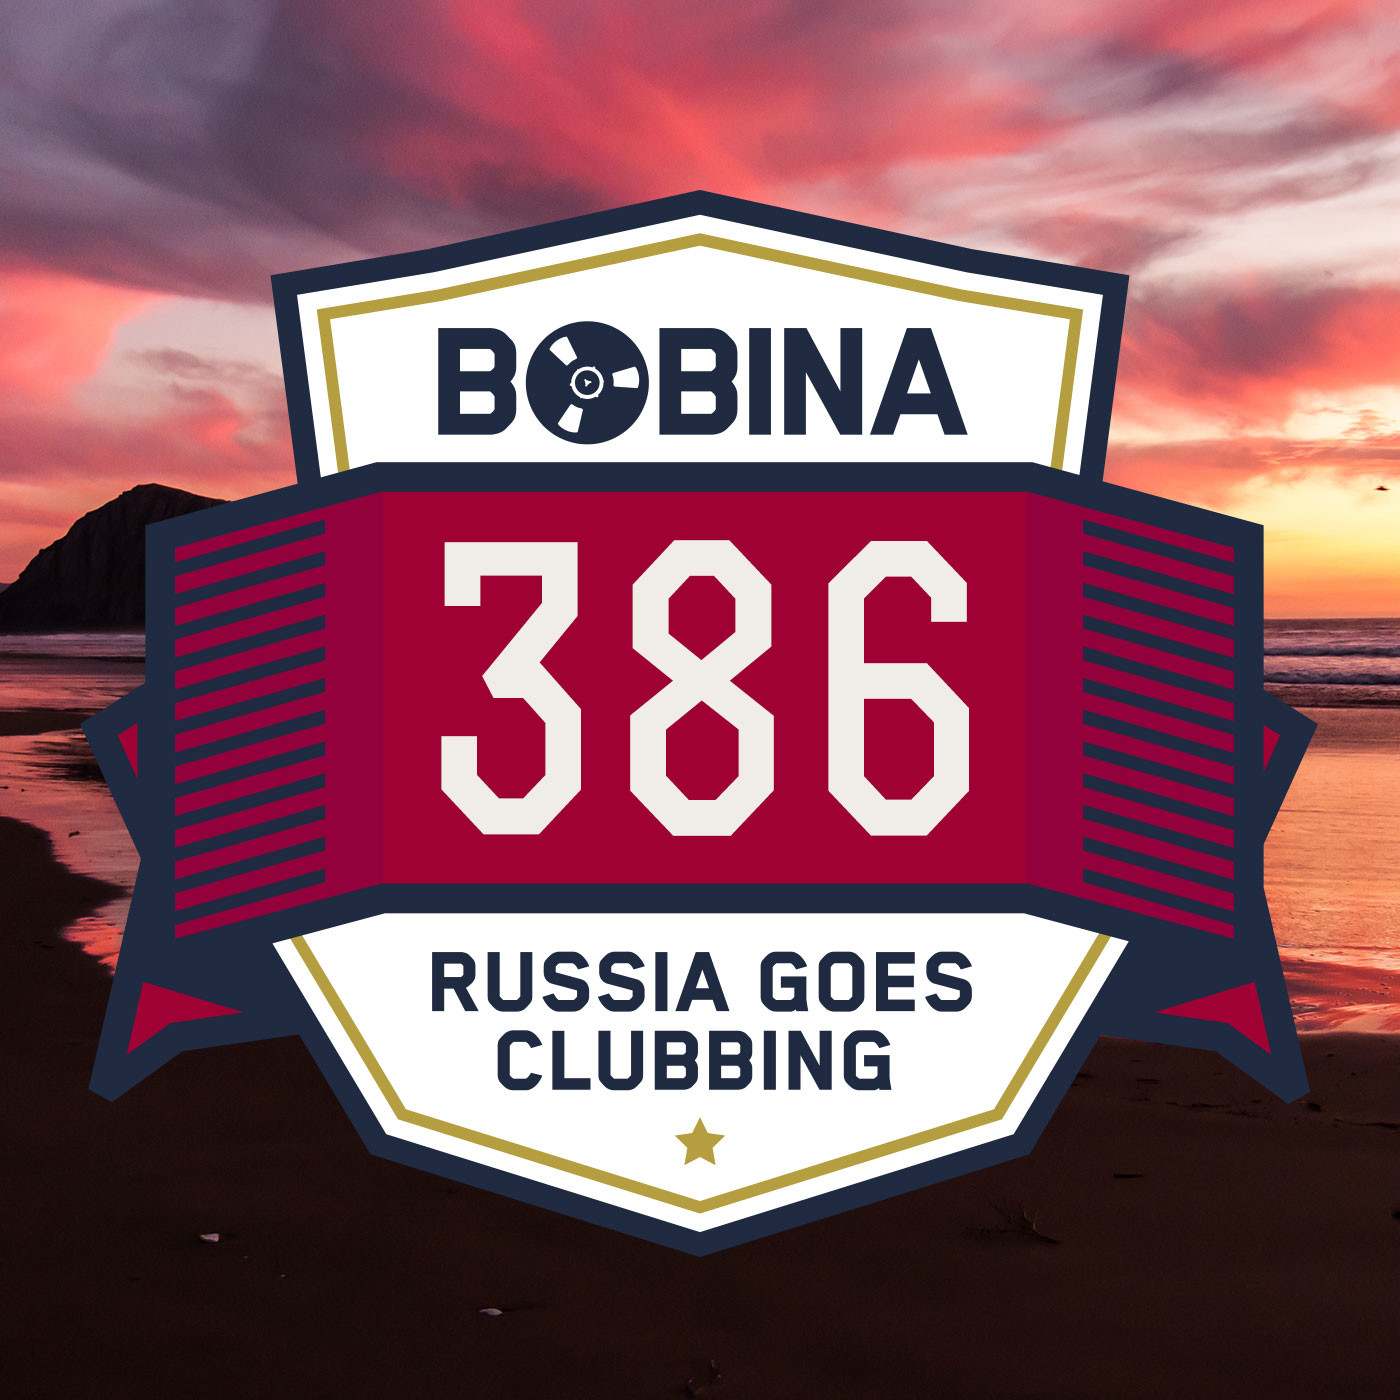 Bobina - Russia goes Clubbing. Go to the Club. Go Russia. How to go to russia